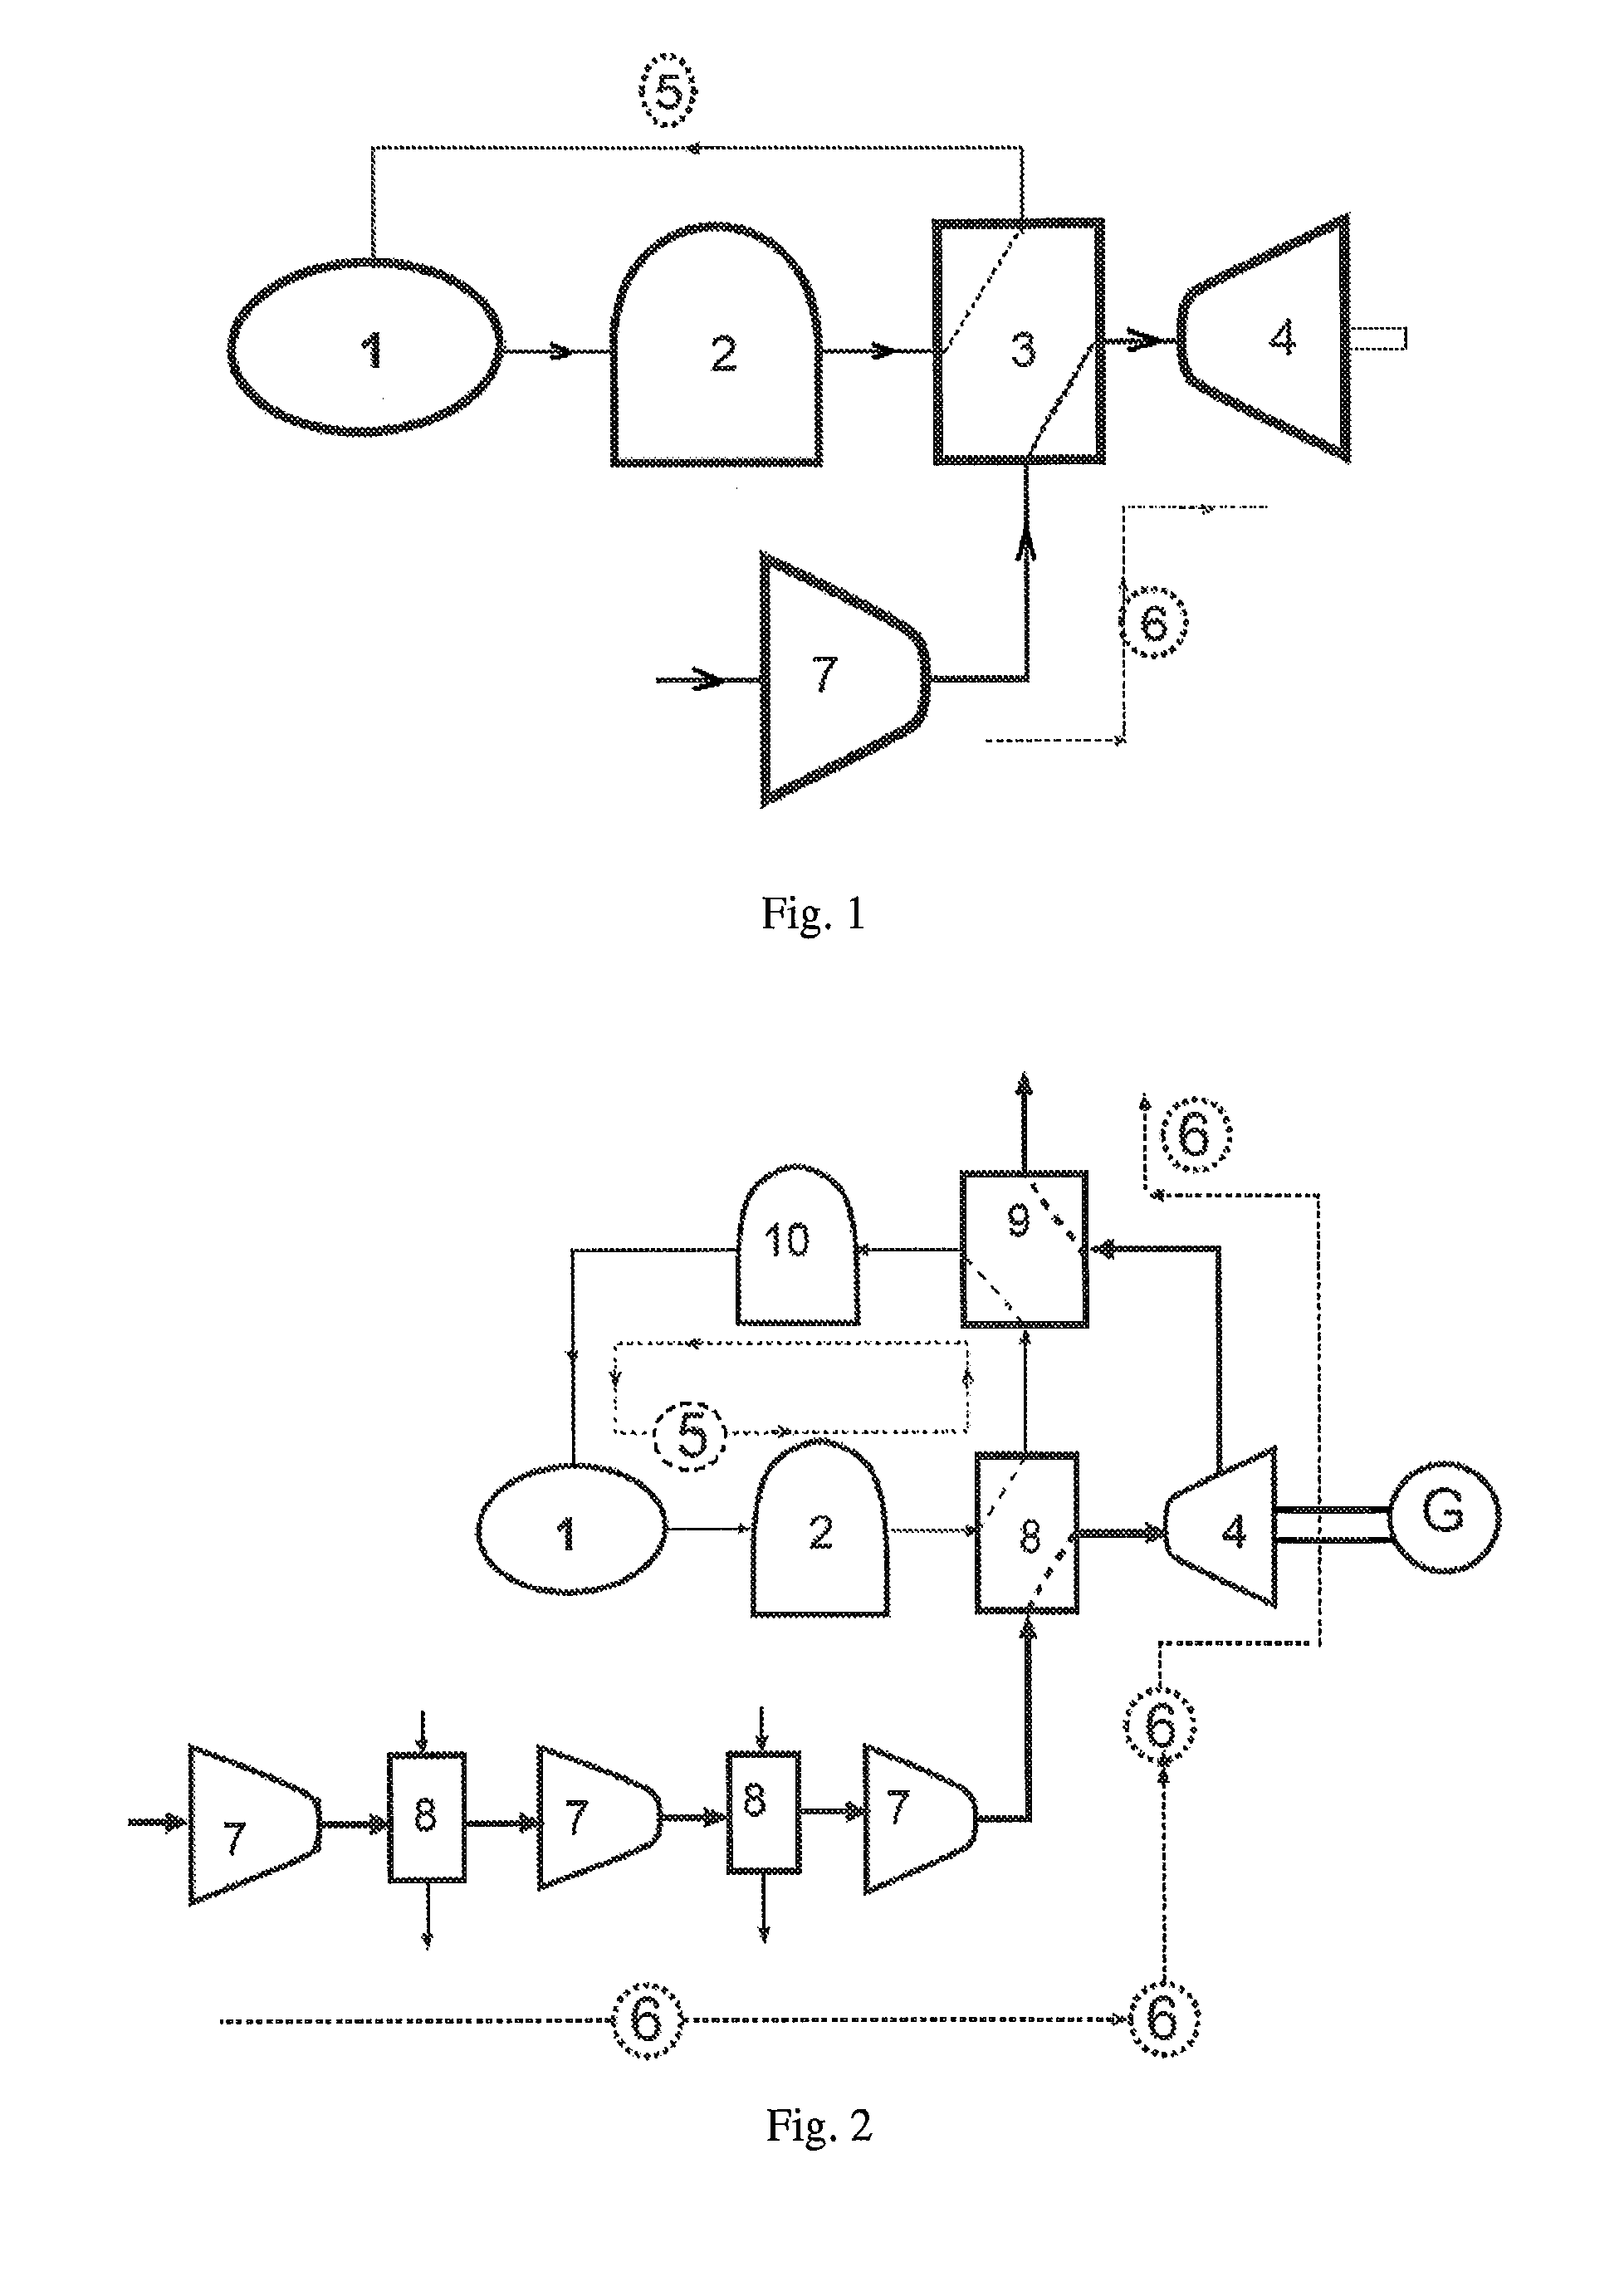 Solar heat storage and high temperature gas generating system with working medium being flowing sand